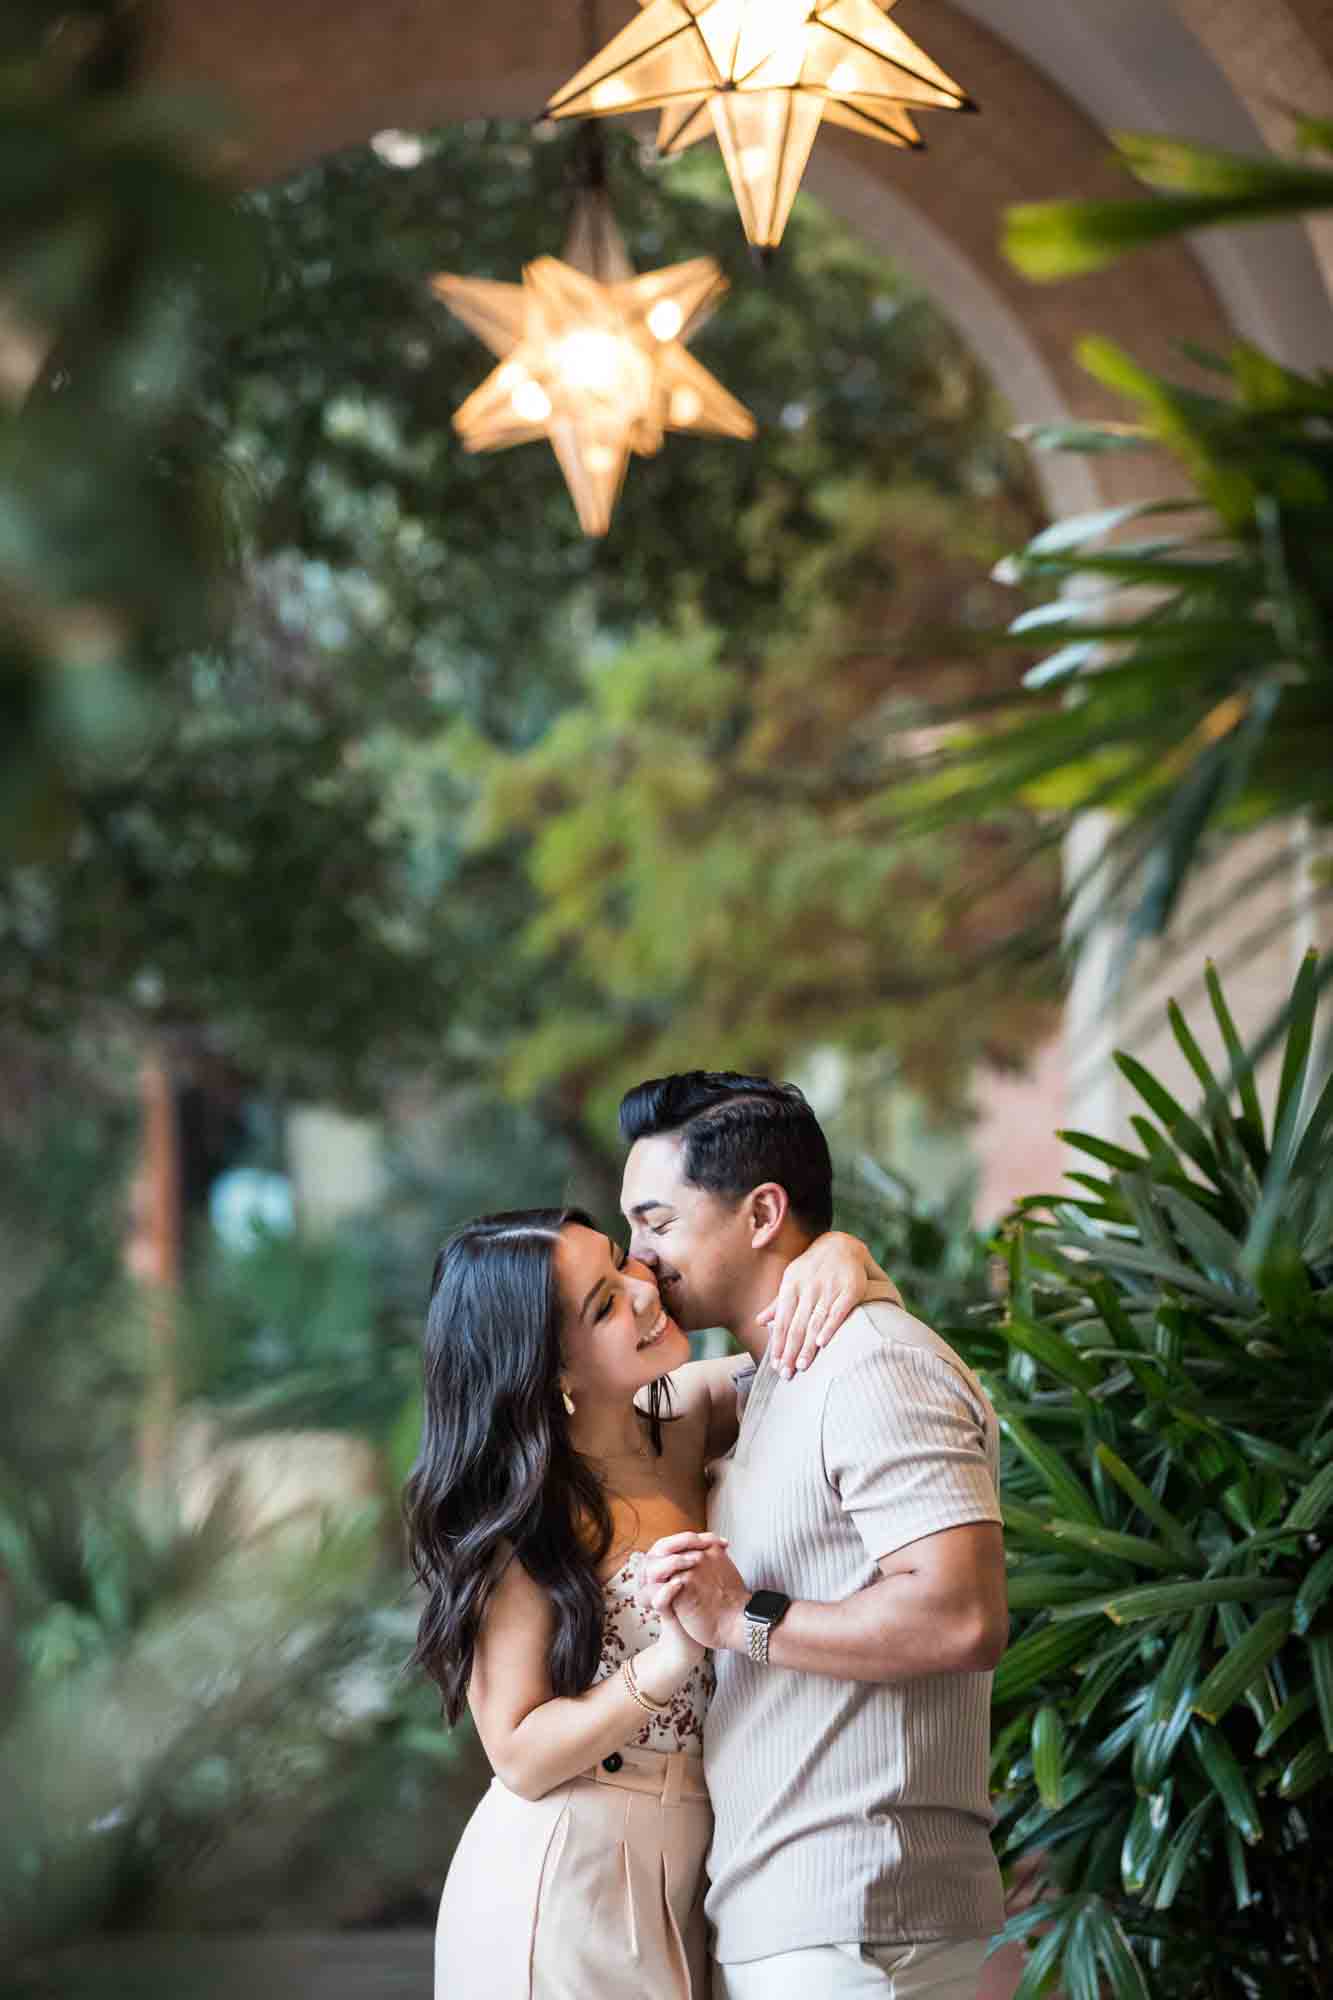 Couple dancing under star-shaped lights surrounded by plants for an article on how to propose at the Pearl